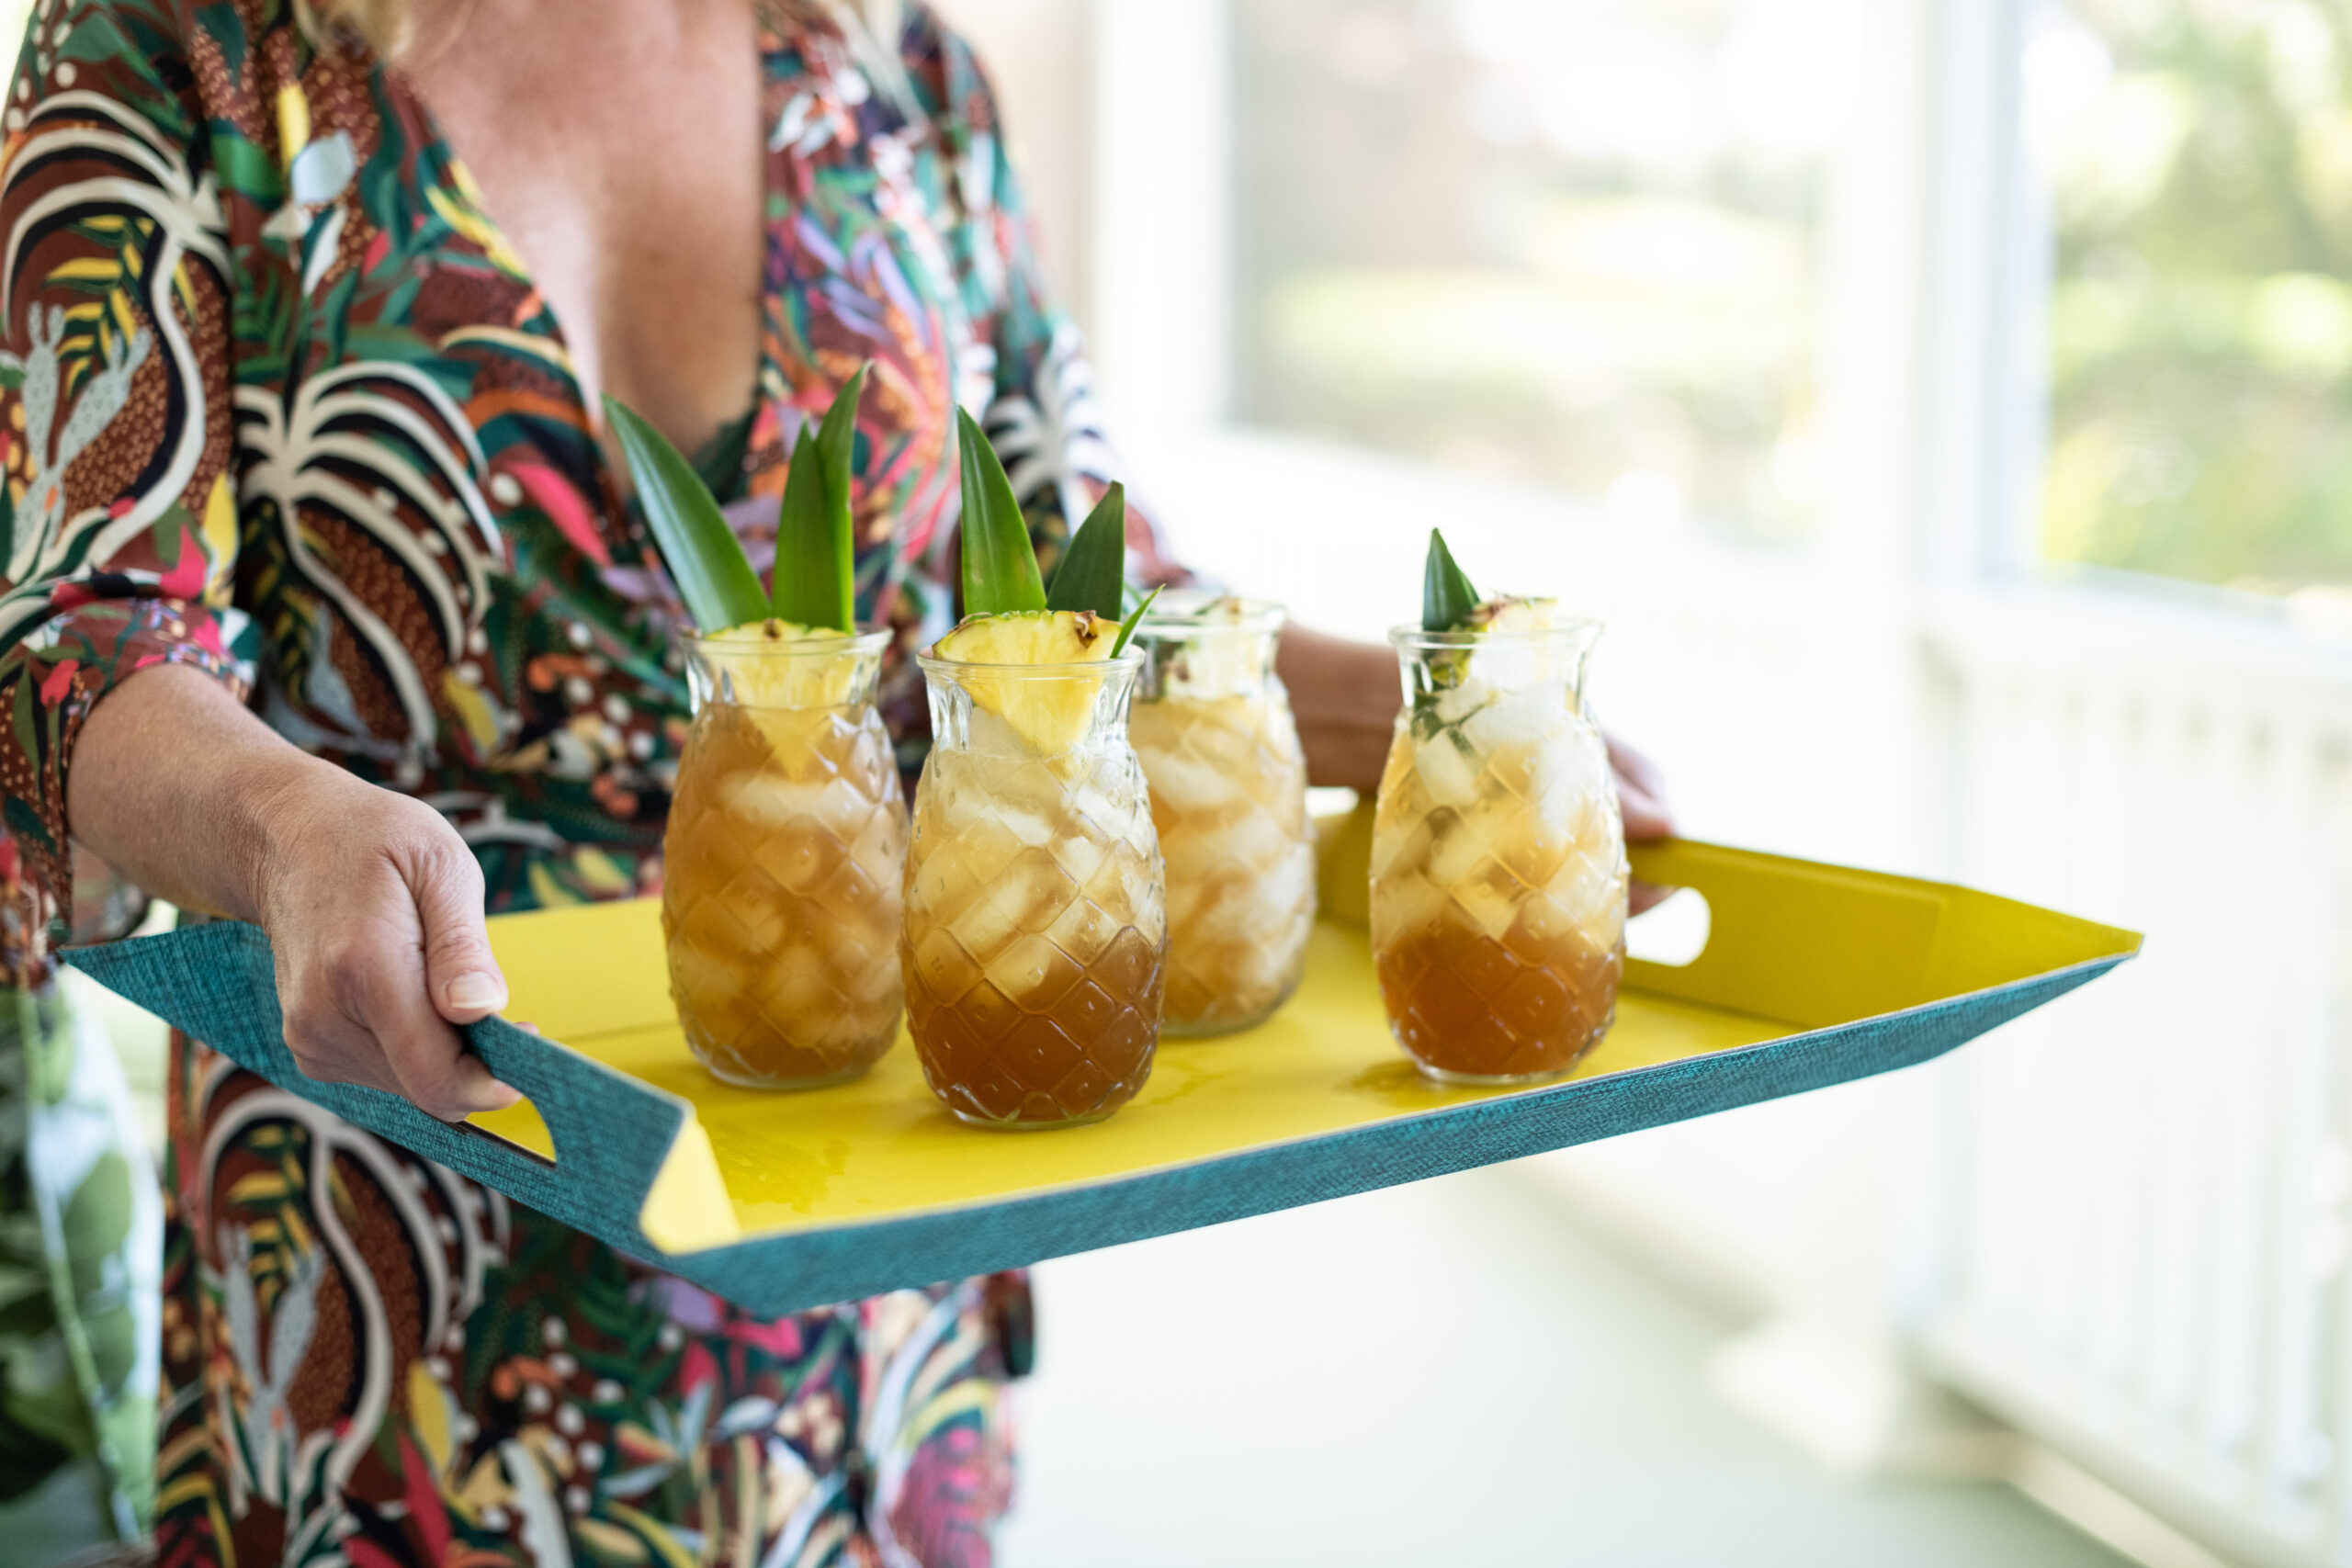 Serving welcome drinks on Sun Cookery tray and pineapple glasses!